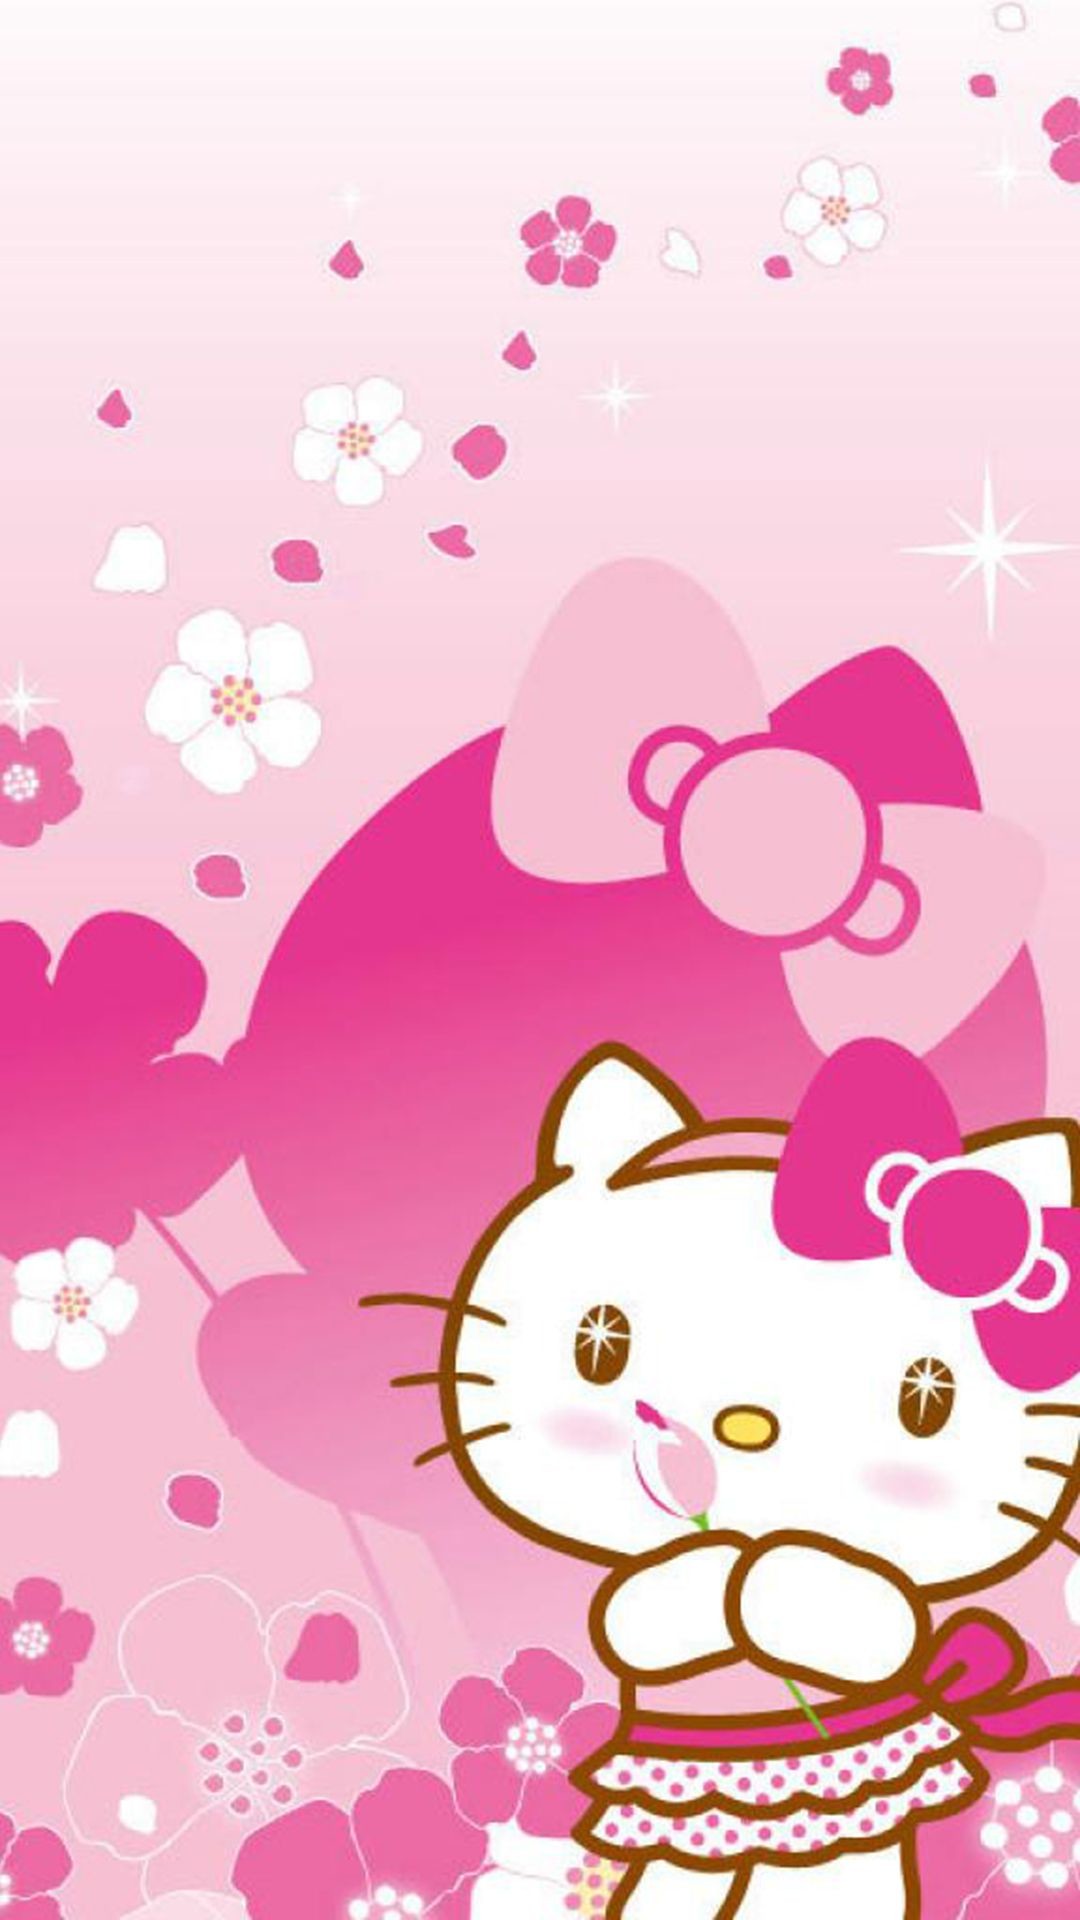 1080x1920 Hello kitty wallpaper for android – androidwallpaper.info